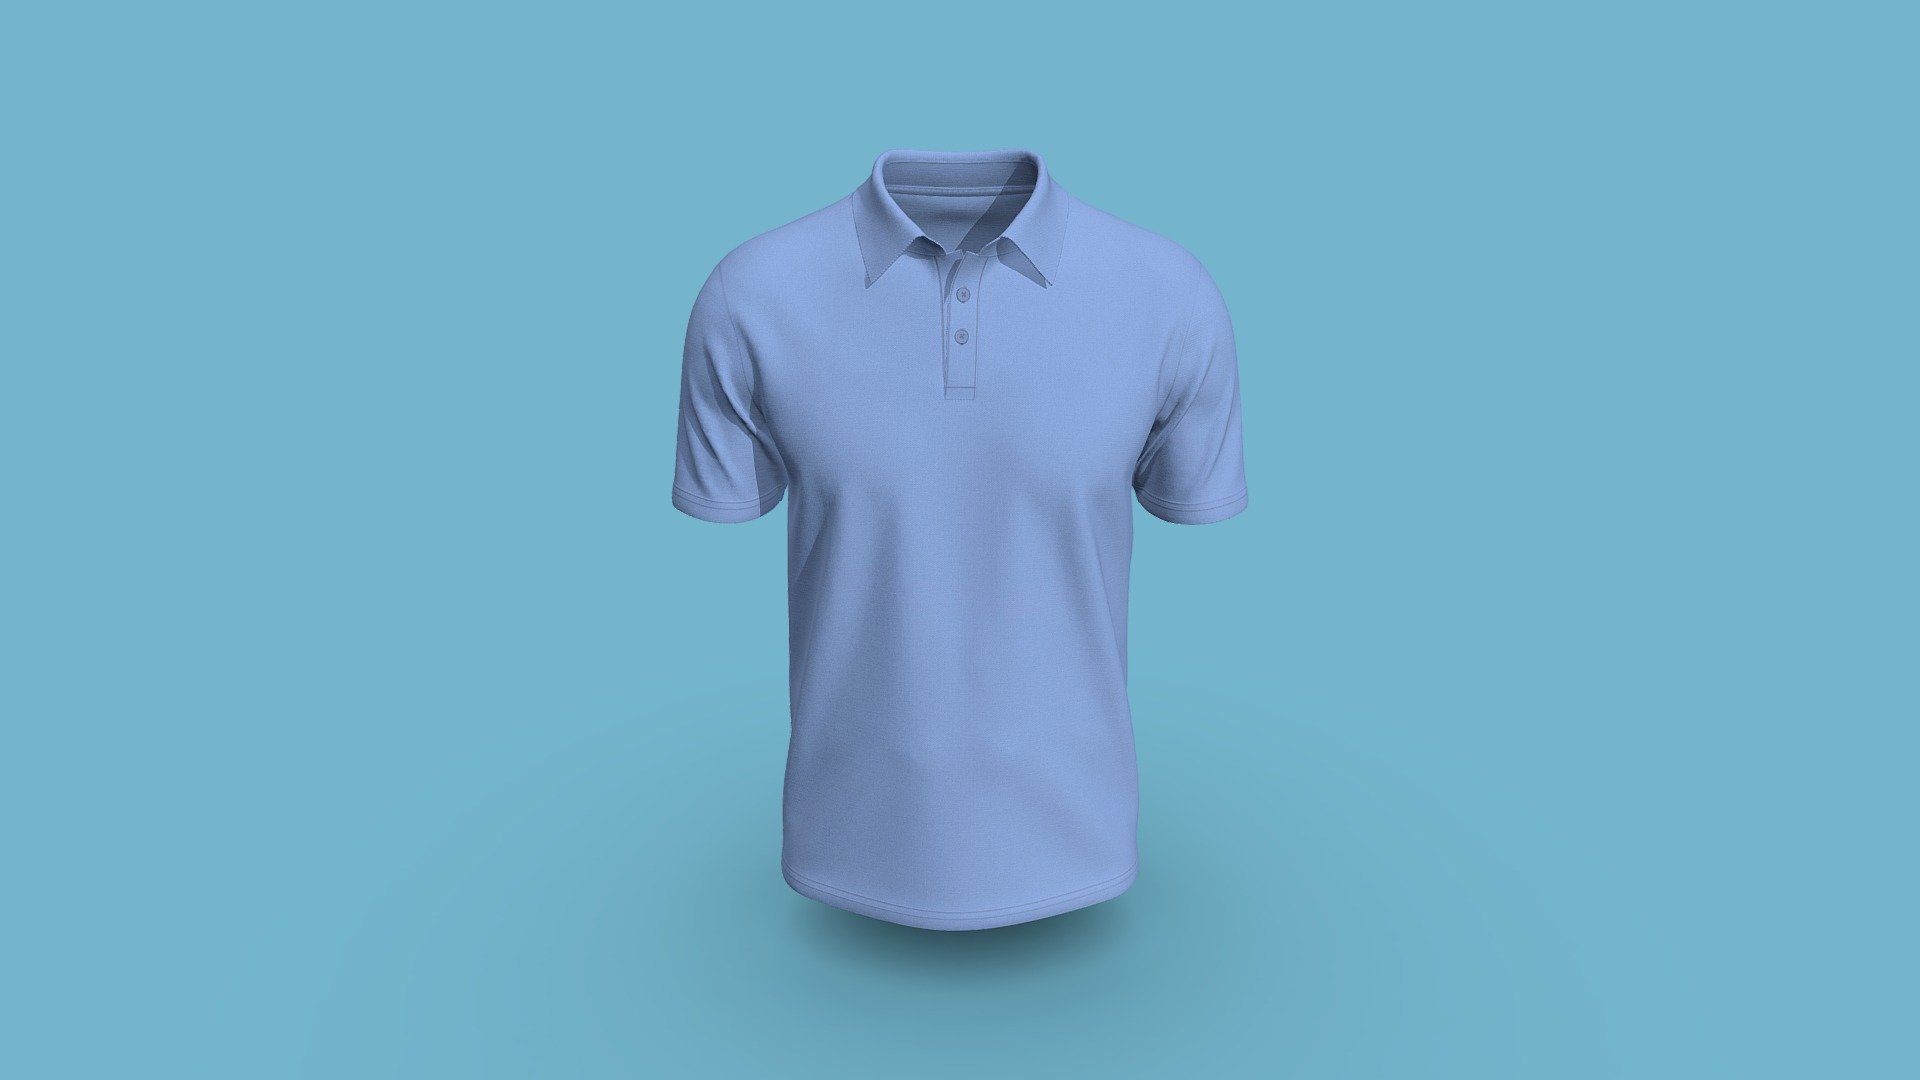 Cloth Title = Classic Mens Knit Fashion Polo 

SKU = DG100202 

Category = Men 

Product Type = Polo 

Cloth Length = Regular 

Body Fit = Regular Fit 

Occasion = Casual  

Sleeve Style = Short Sleeve 


Our Services:

3D Apparel Design.

OBJ,FBX,GLTF Making with High/Low Poly.

Fabric Digitalization.

Mockup making.

3D Teck Pack.

Pattern Making.

2D Illustration.

Cloth Animation and 360 Spin Video.


Contact us:- 

Email: info@digitalfashionwear.com 

Website: https://digitalfashionwear.com 


We designed all the types of cloth specially focused on product visualization, e-commerce, fitting, and production. 

We will design: 

T-shirts 

Polo shirts 

Hoodies 

Sweatshirt 

Jackets 

Shirts 

TankTops 

Trousers 

Bras 

Underwear 

Blazer 

Aprons 

Leggings 

and All Fashion items. 





Our goal is to make sure what we provide you, meets your demand 3d model